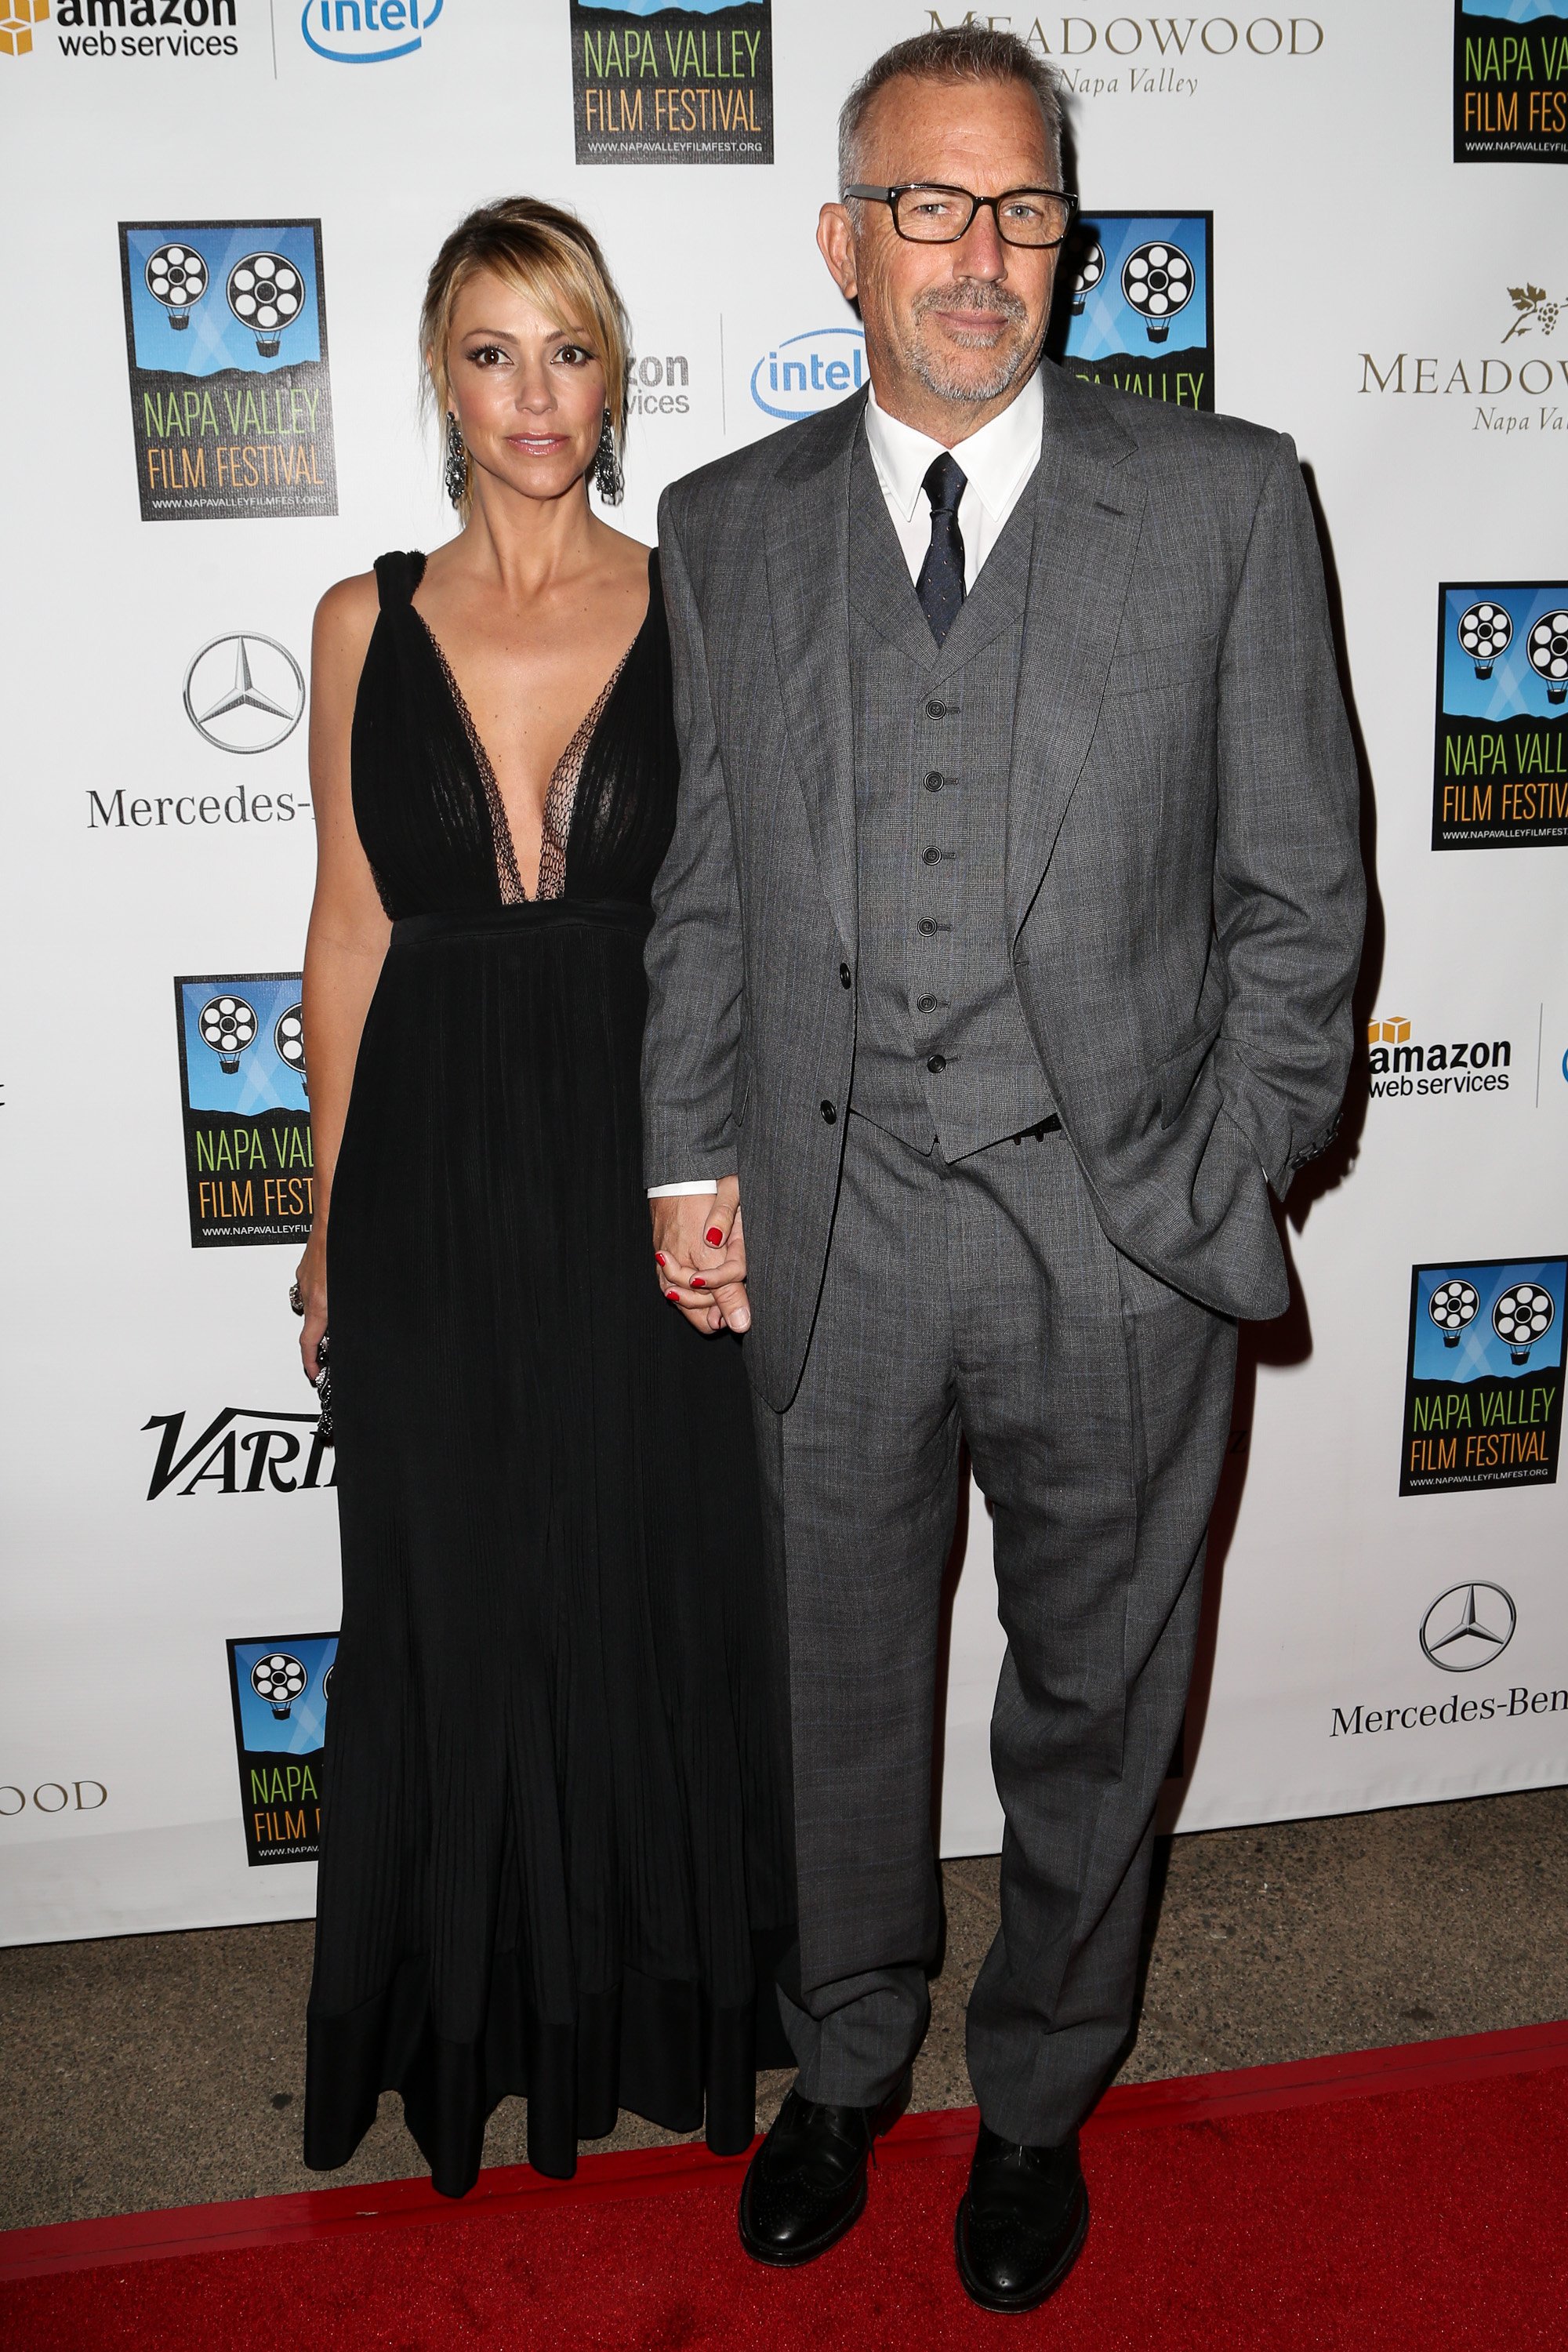 Kevin Costner and wife Christine Baumgartner attend Mercedes-Benz arrivals at Napa Valley Film Festival celebrity tribute night on November 14, 2014, in Napa, California. | Source: Getty Images